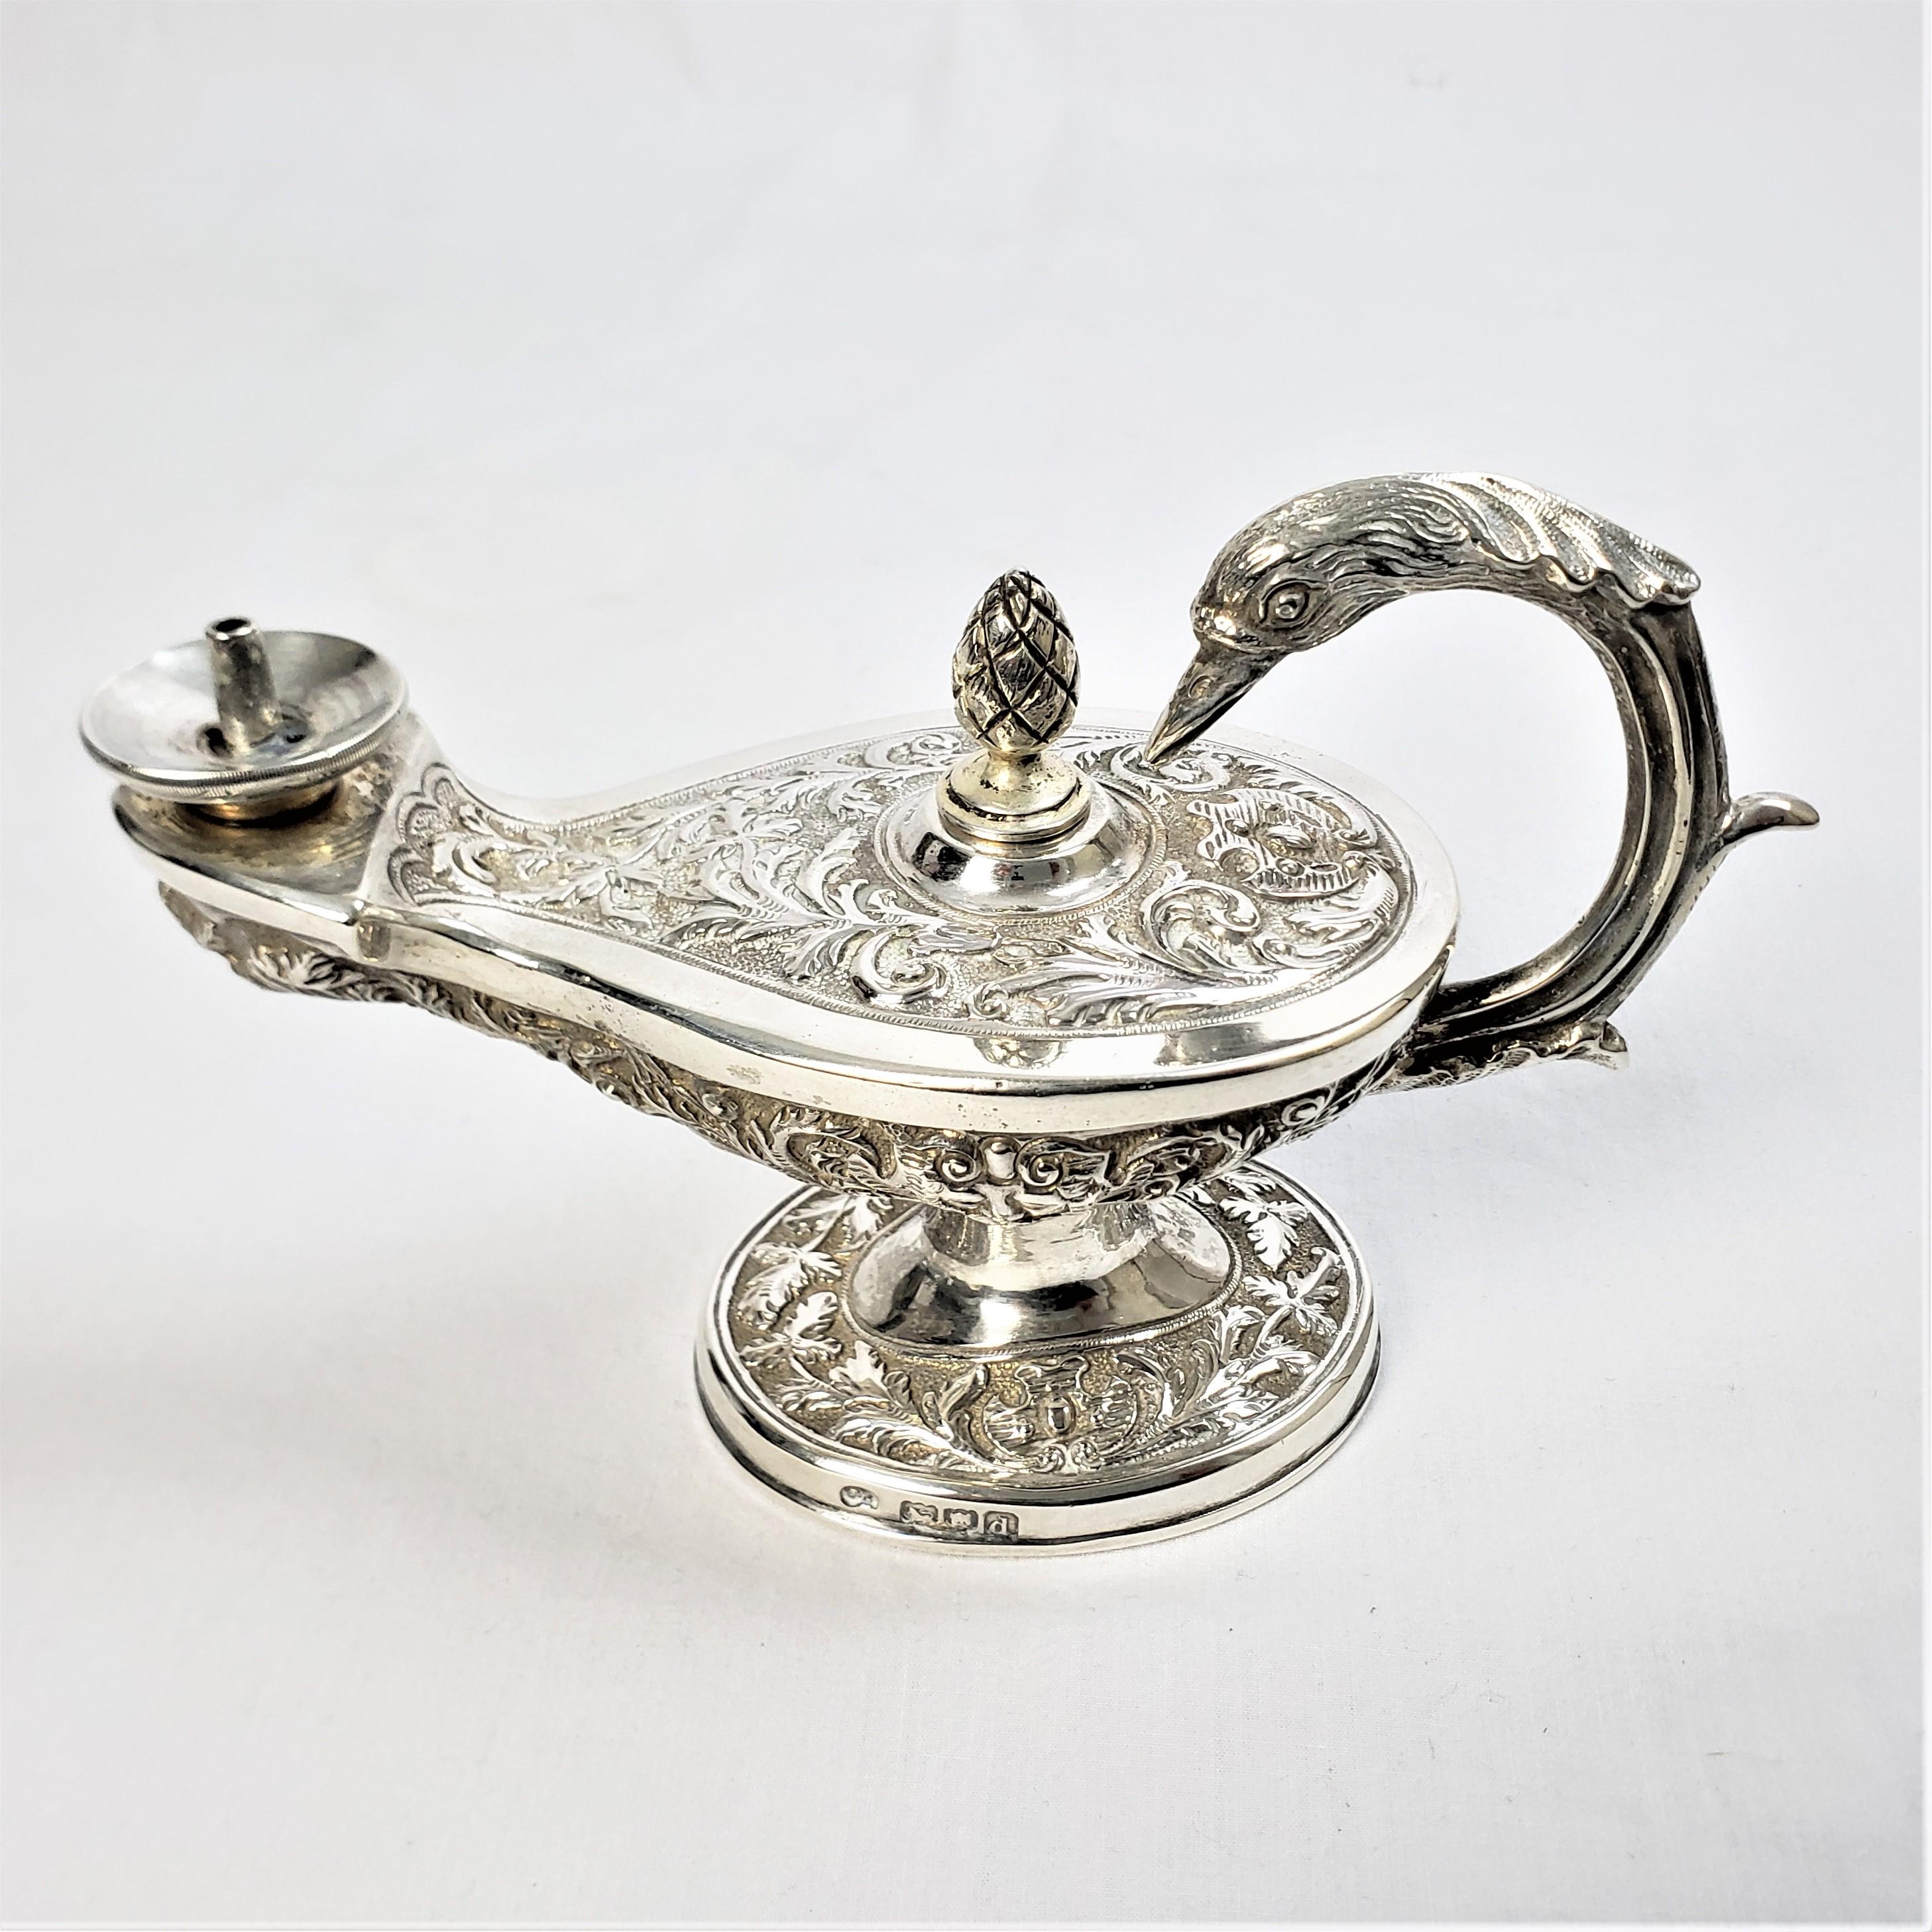 This antique figural table cigar lighter is hallmarked by an unknown maker, and originated from England, dating to 1815 and done in the period Georgian style. The lighter is composed of sterling silver with a weighted base, and metal wand and